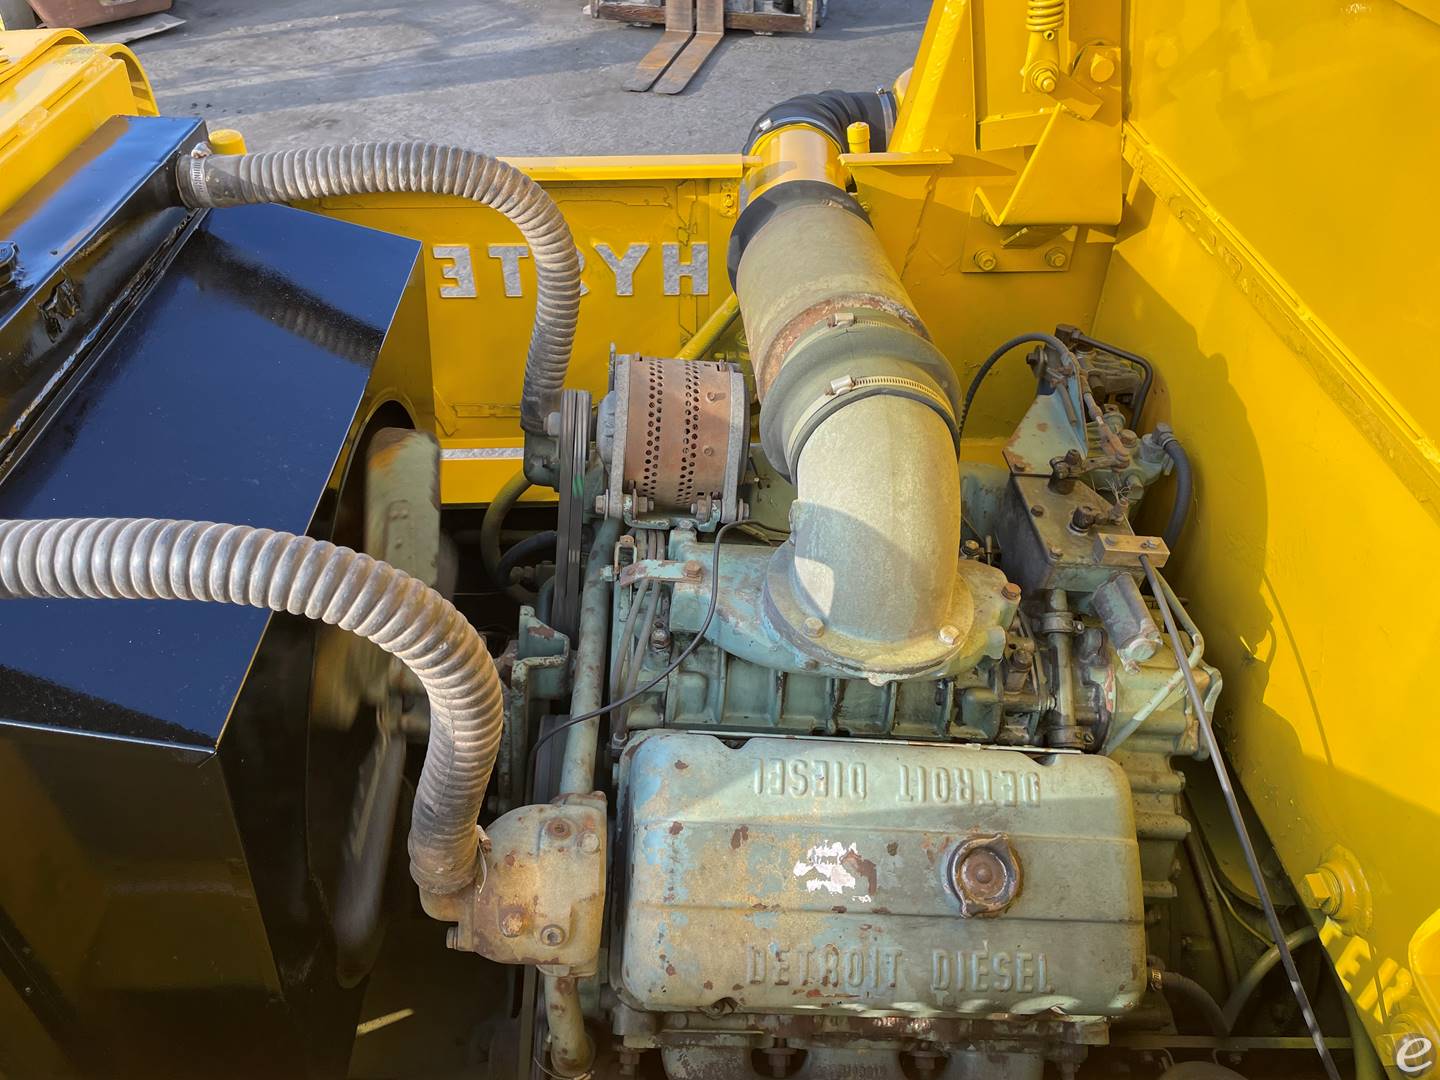 1988 Hyster H520